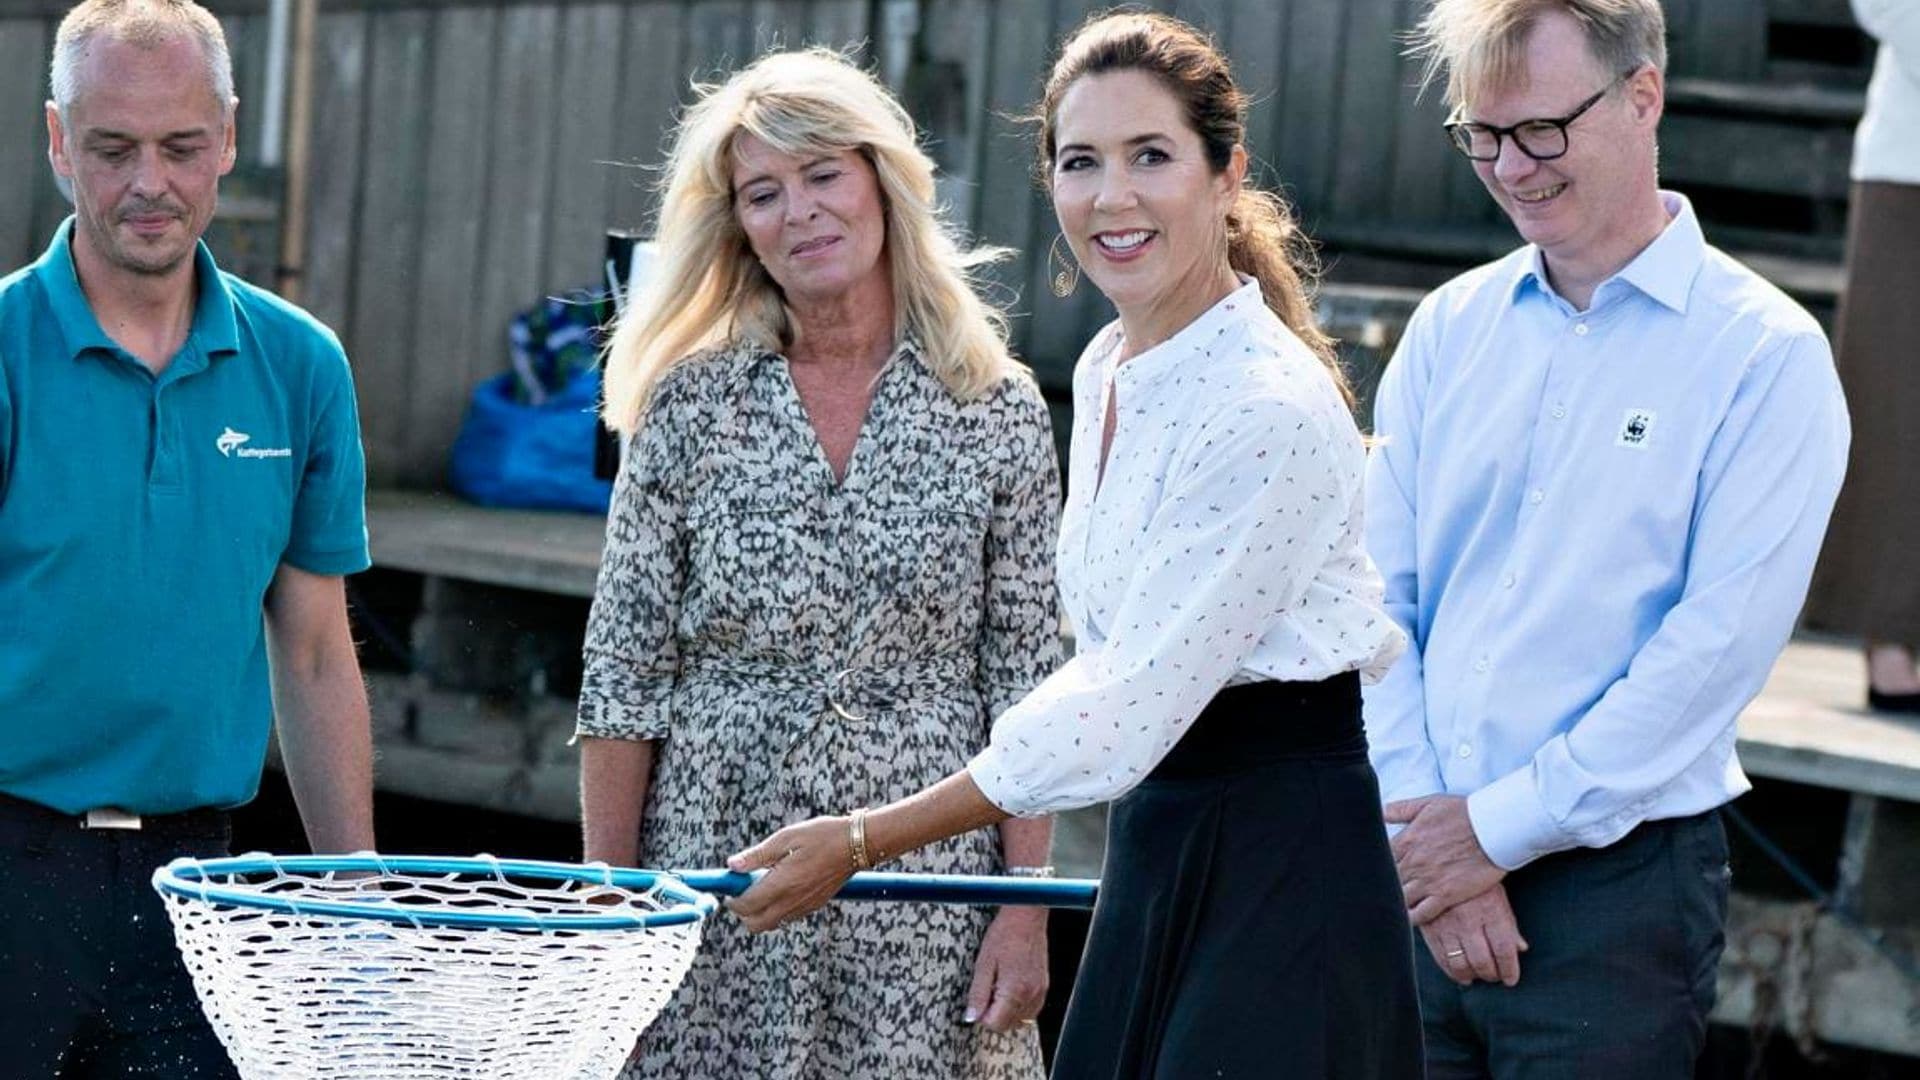 Crown Princess Mary of Denmark owns up to mistake